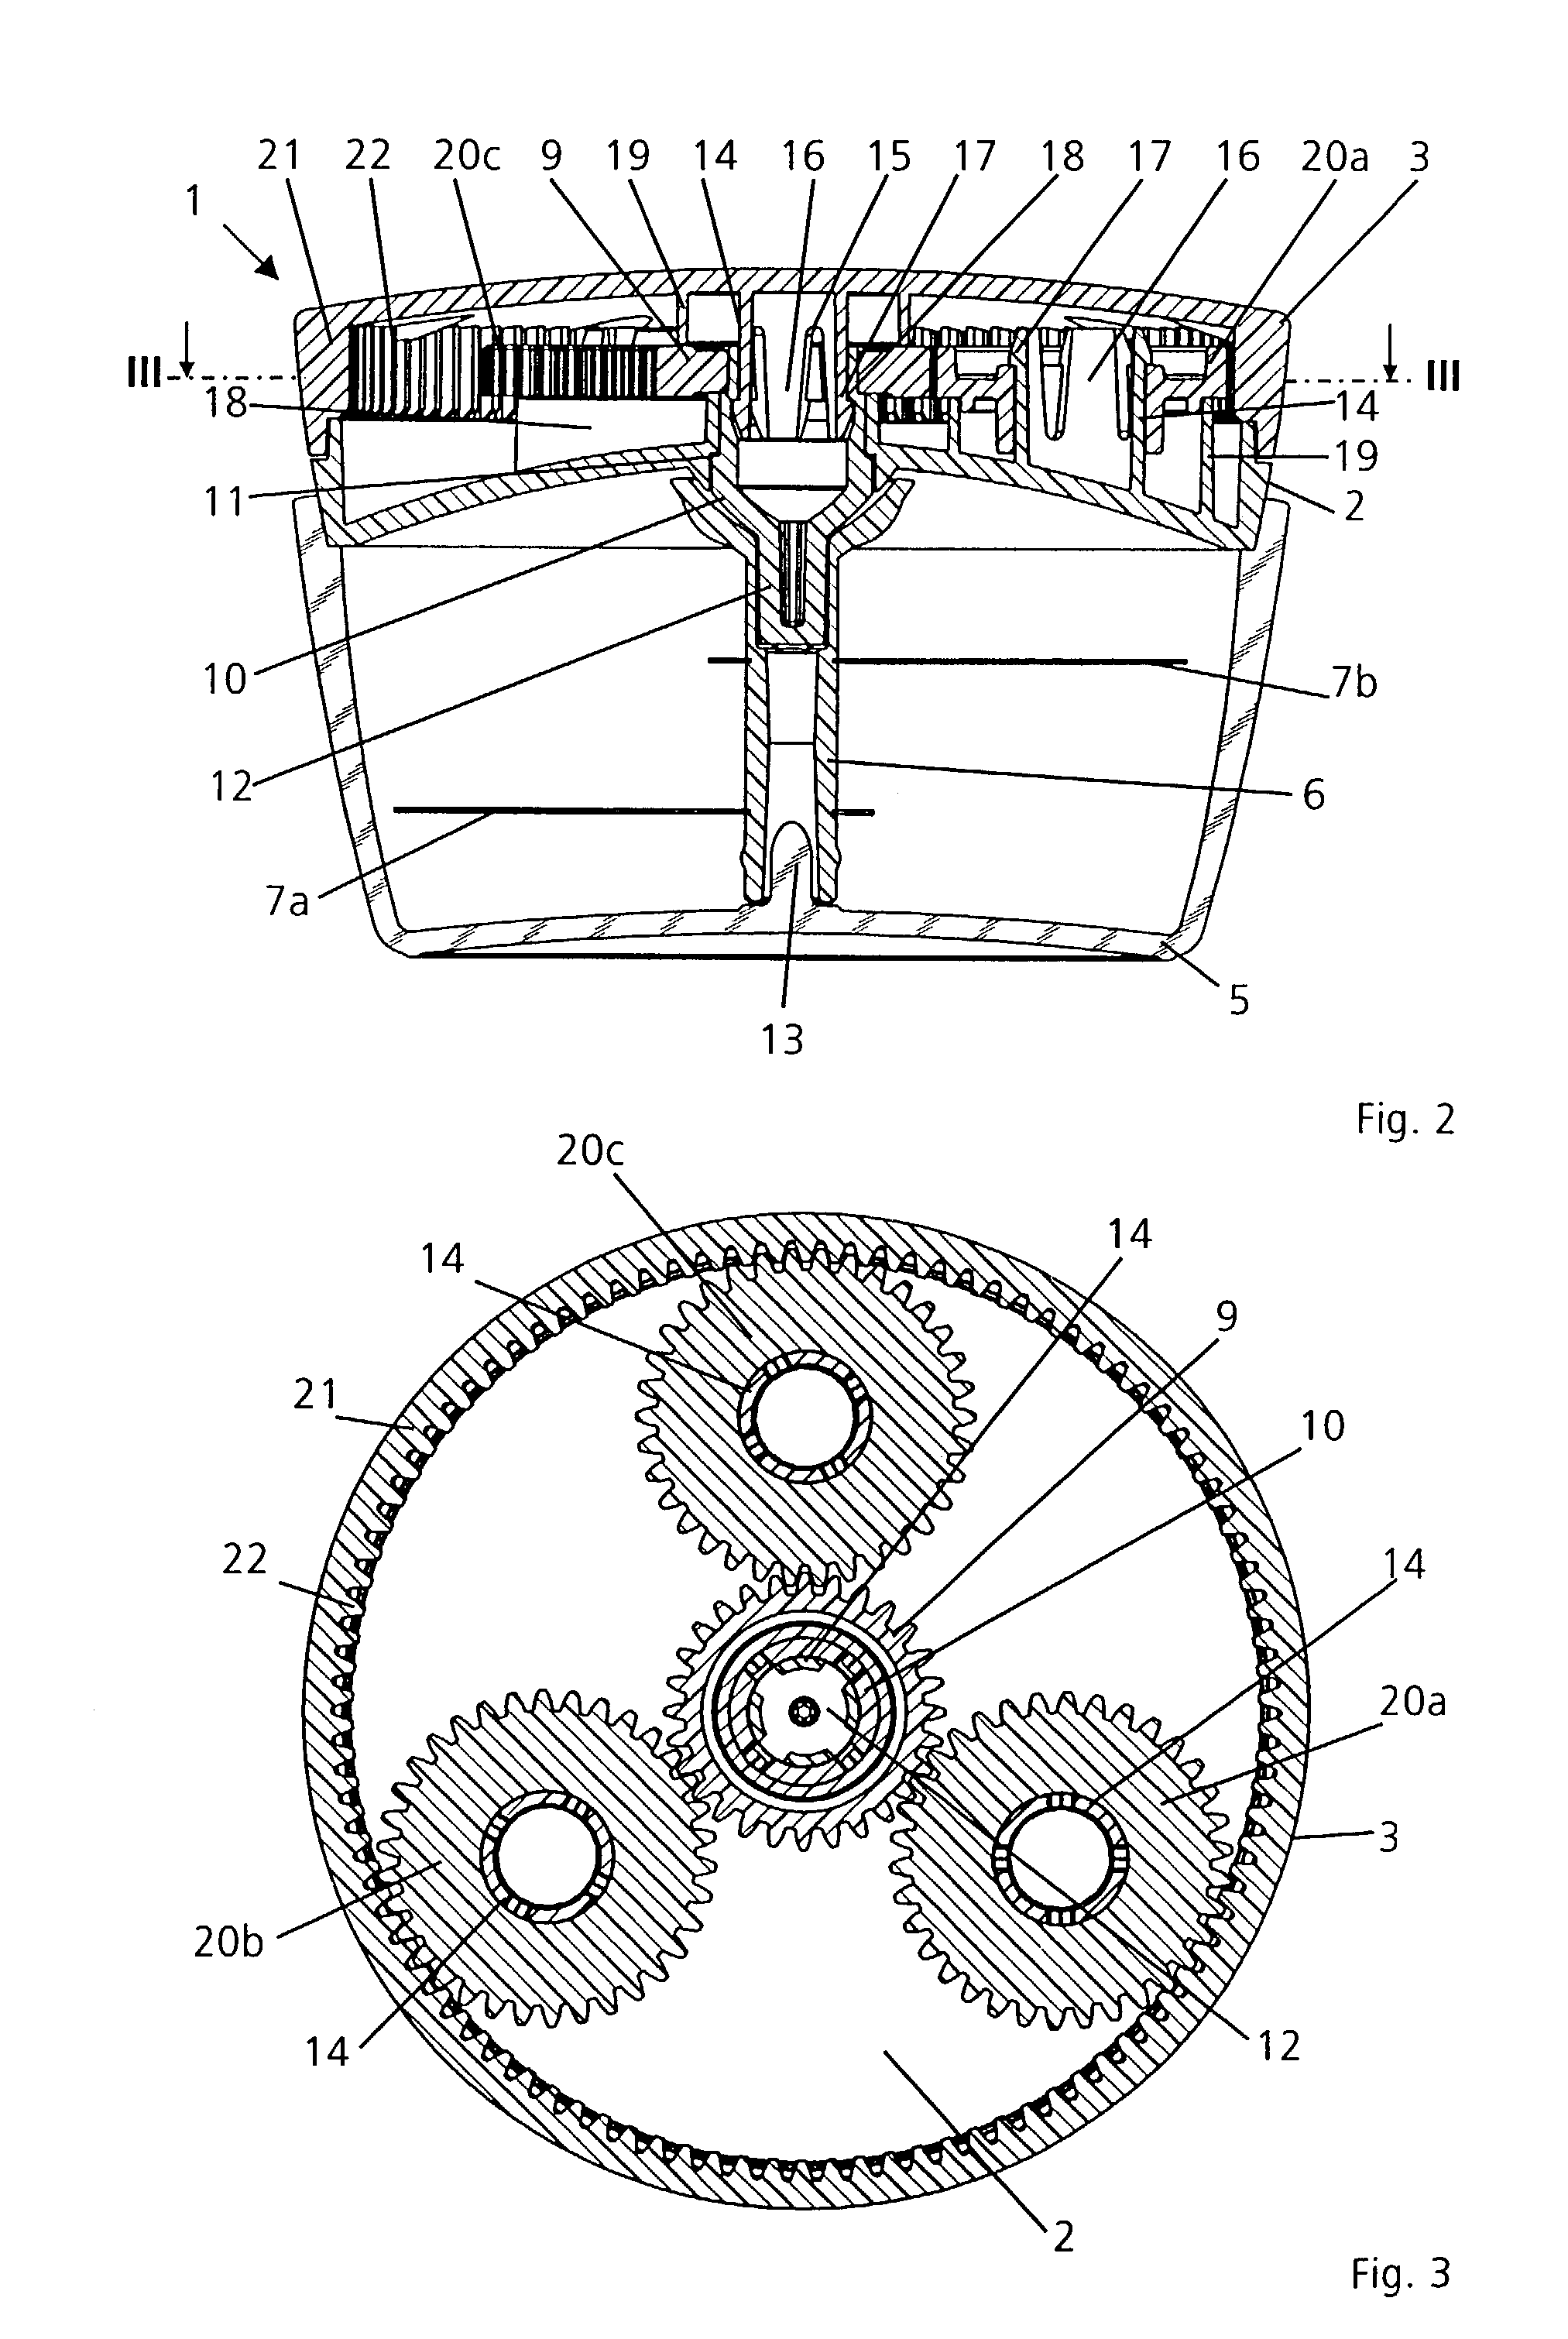 Manually drivable apparatus for comminuting foods